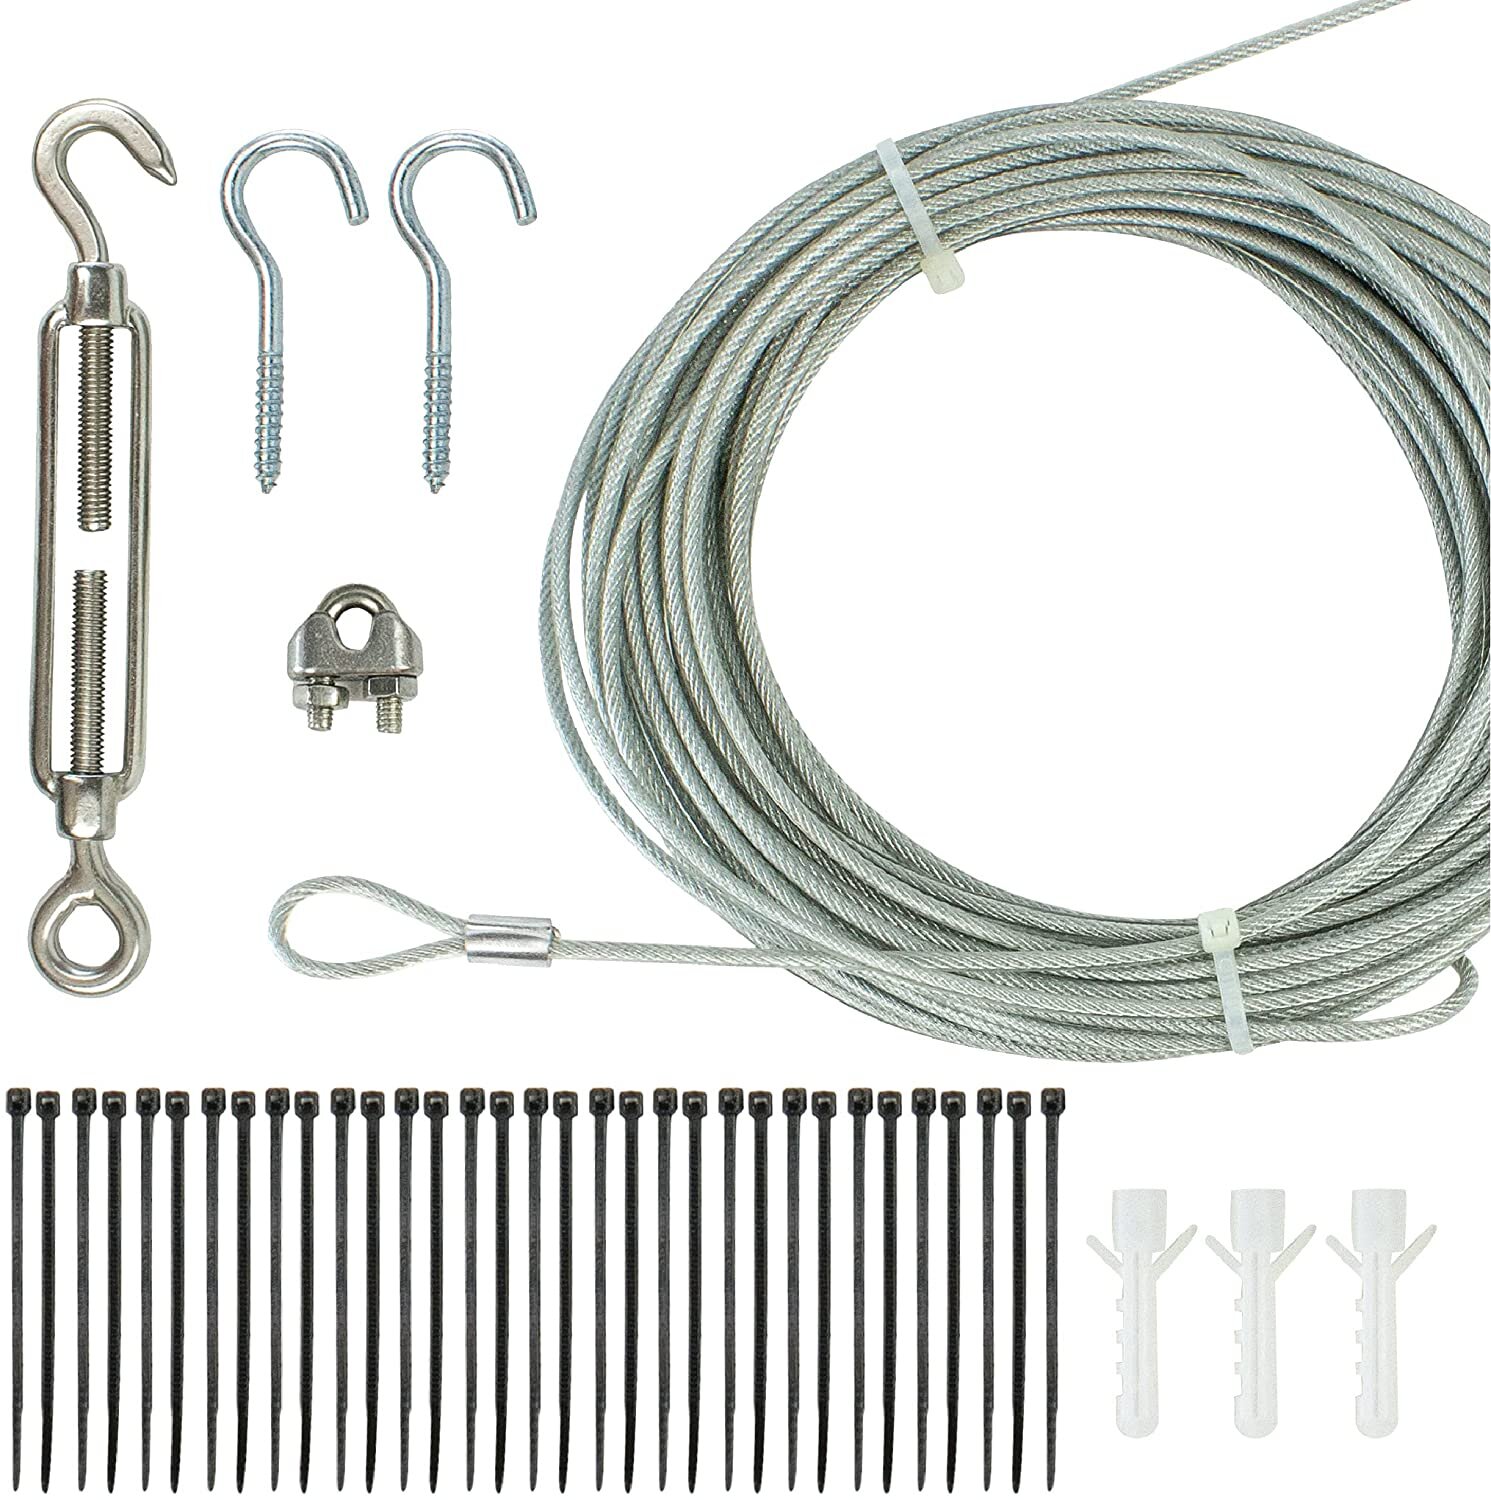 Newhouse Lighting STRINGKIT2 Stainless Steel Hanging/Suspension Kit With  Vinyl Coated Wire For Outdoor Patio Lights Up To 48 Ft. Includes Turnbuckle  And Hooks - Wayfair Canada